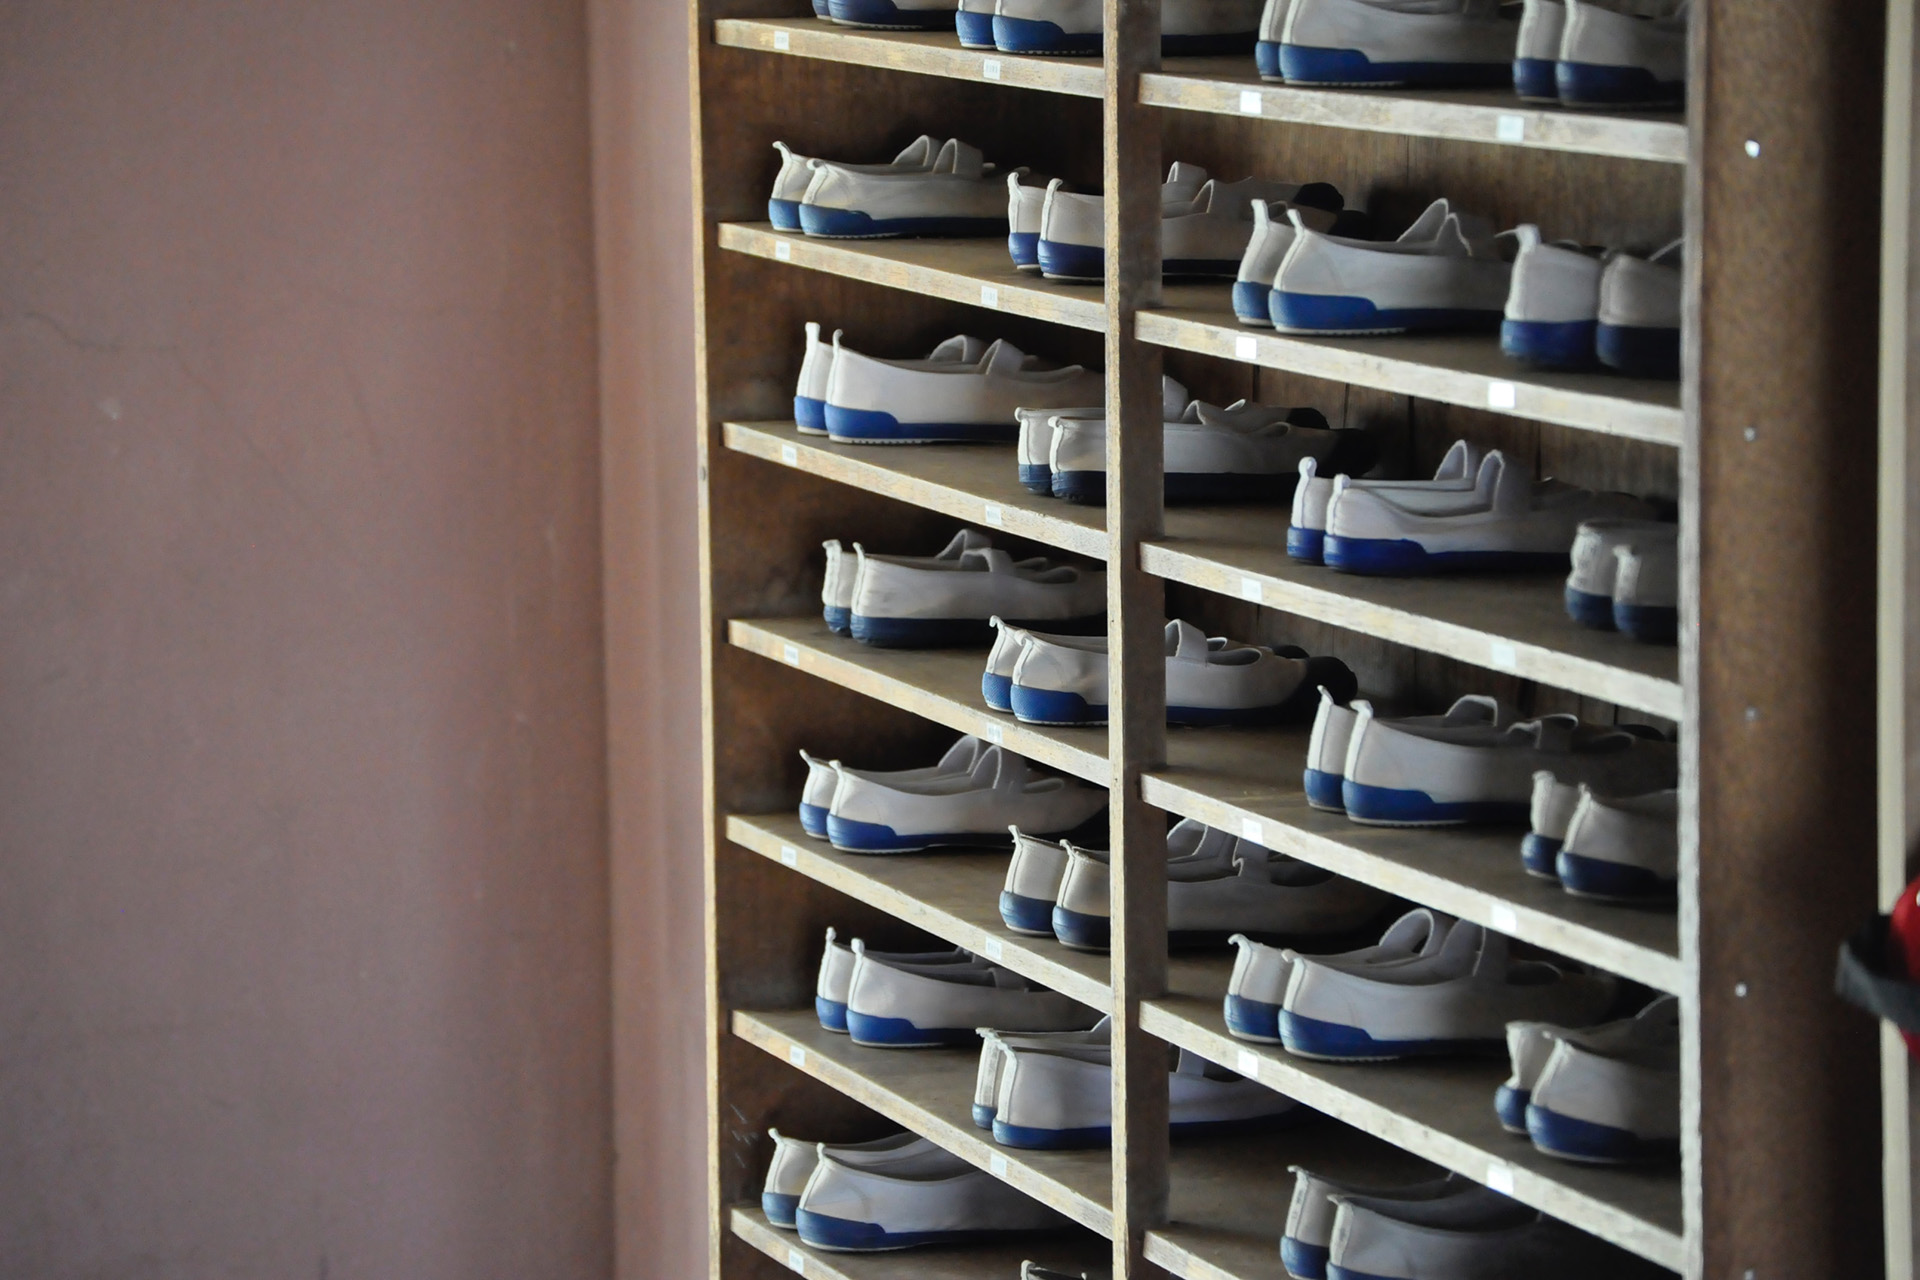 Rows of shoes